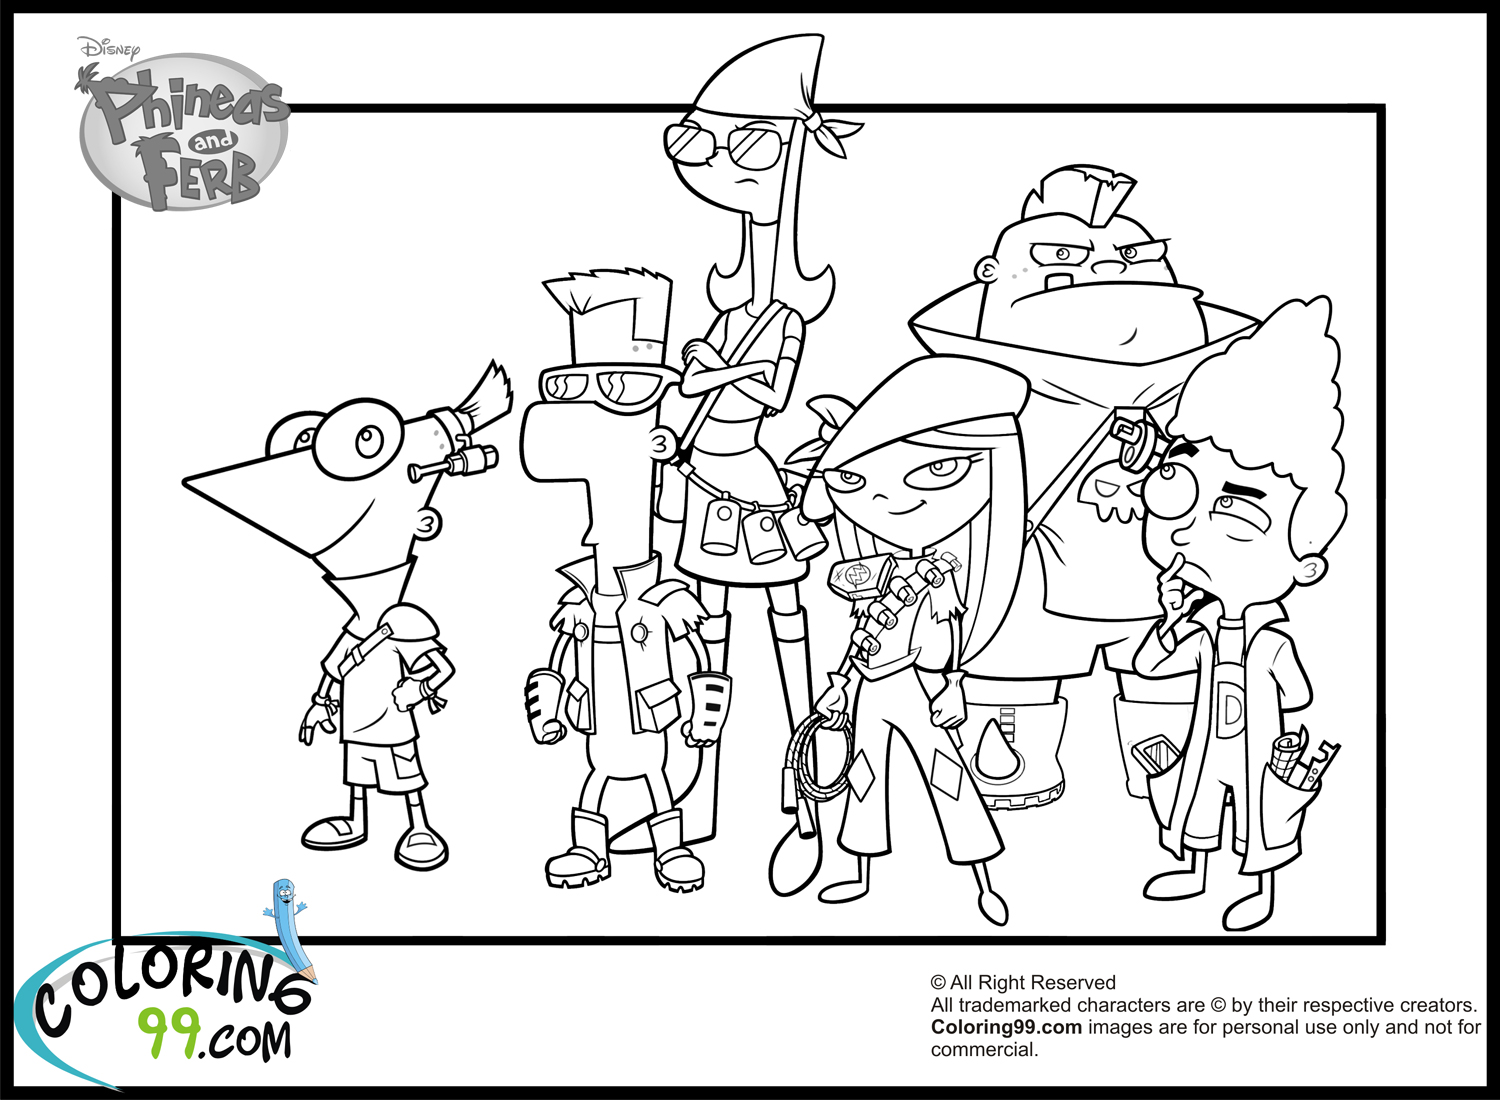 phineas and ferb characters coloring pages